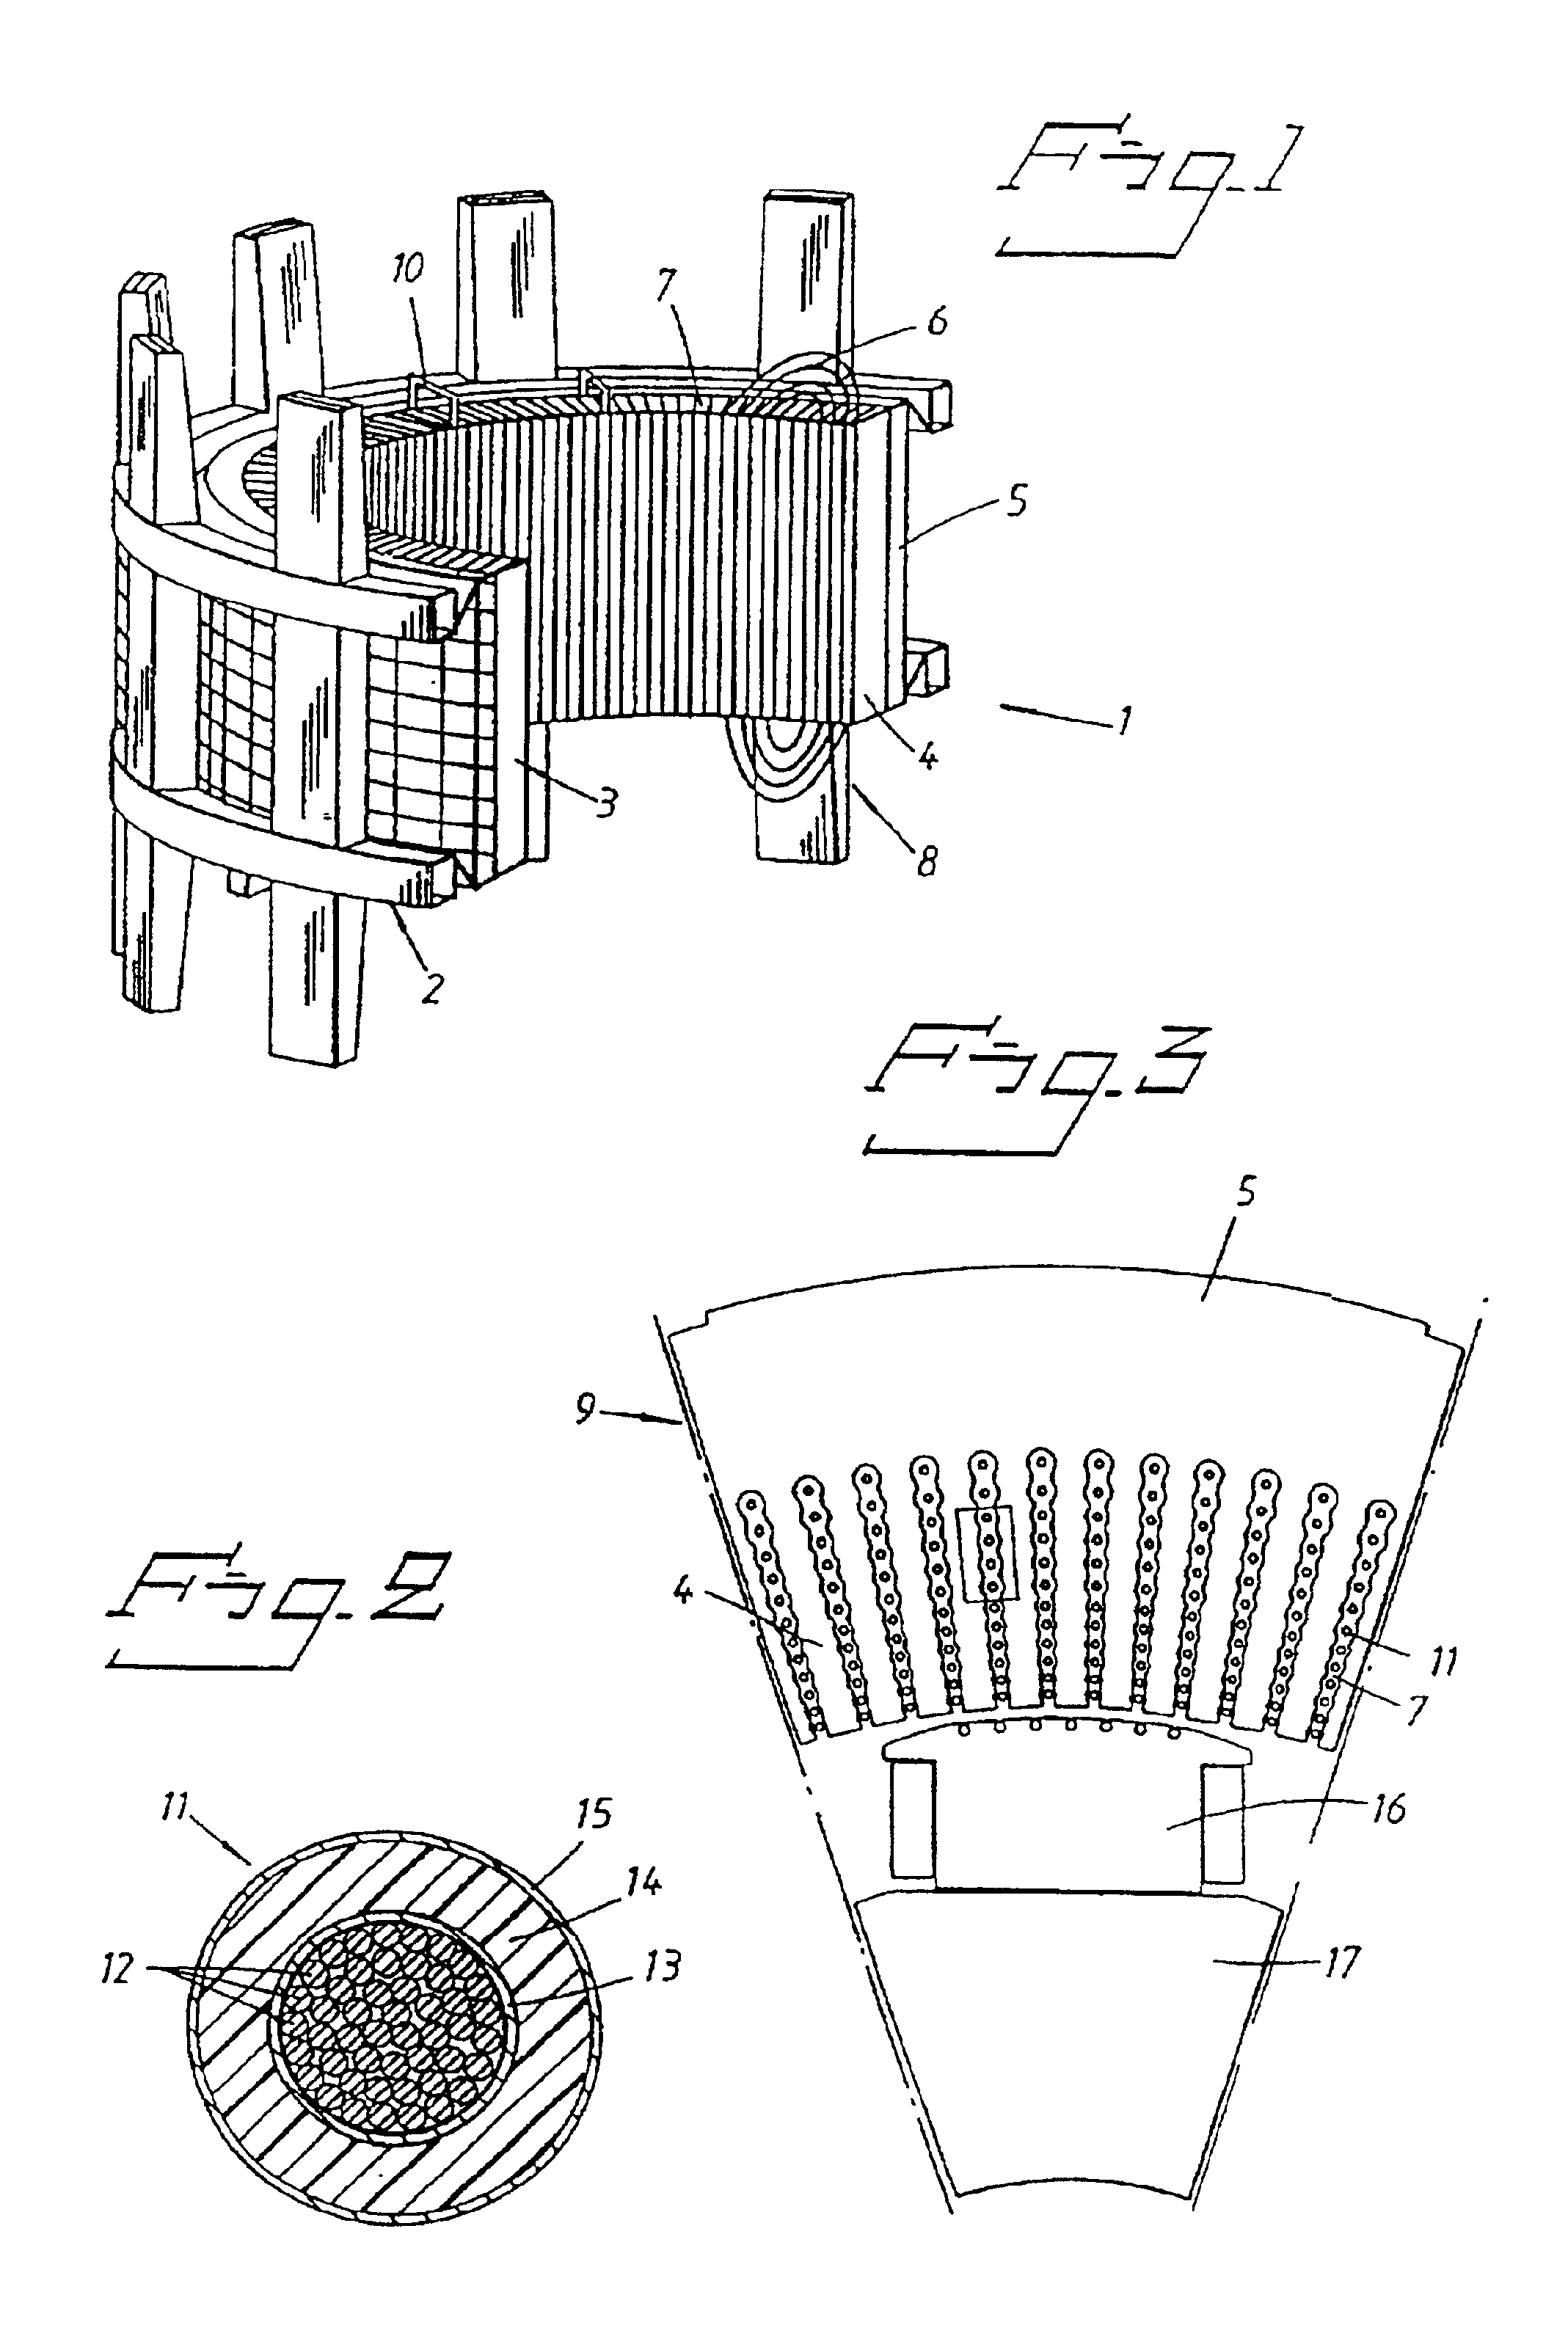 Method of applying a tube member in a stator slot in a rotating electrical machine